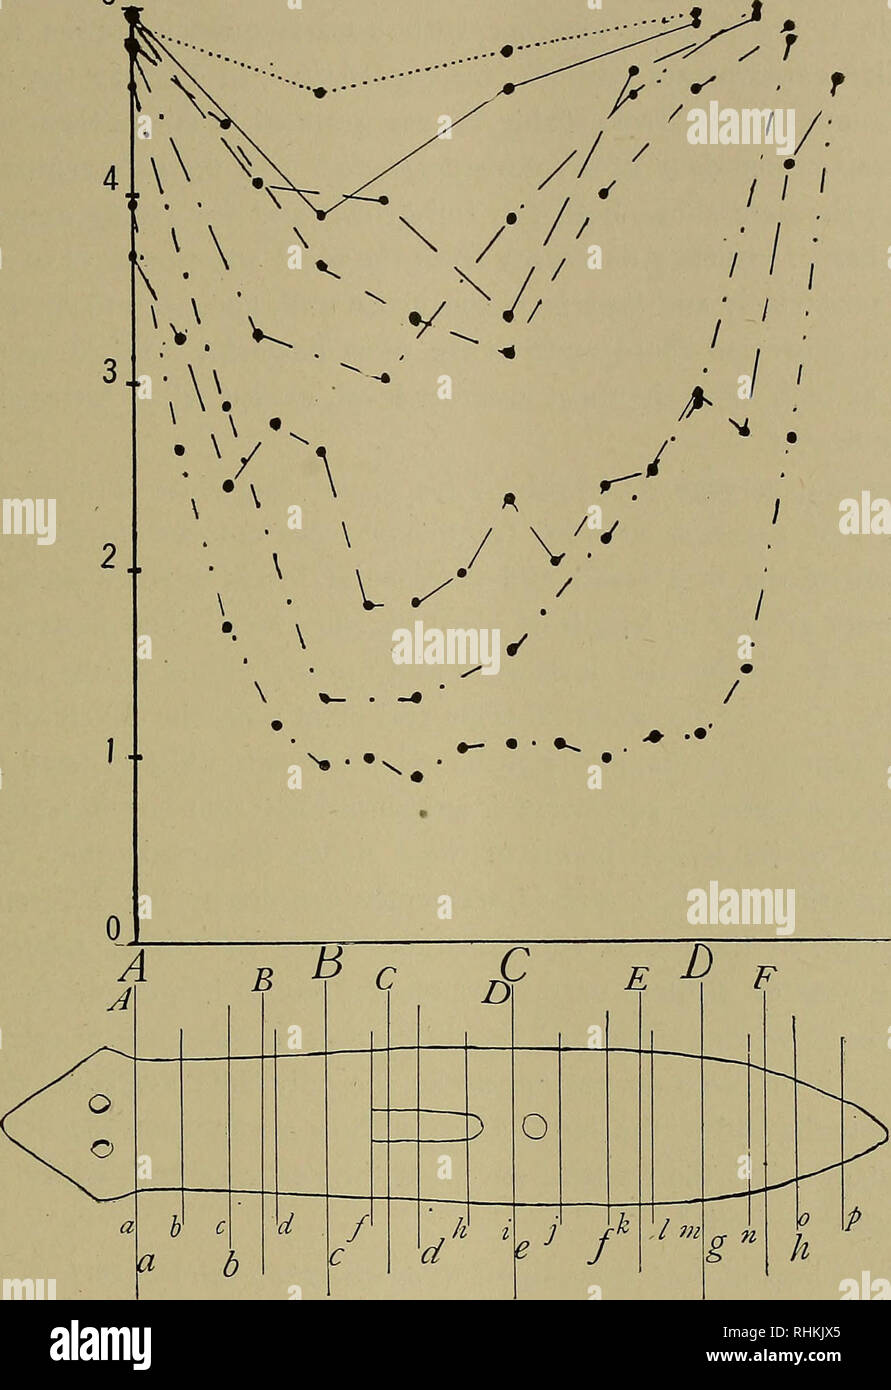 . The Biological bulletin. Biology; Zoology; Marine biology. PHYSIOLOGY OF RECONSTITUTION OF PLANARIA LATA. 131 5. Fig. 21. Head frequencies in relation to length of piece and level of body. P. lata: fourths, unbroken line, no animals; sixths, long dashes, 250 animals; eighths, short dashes, 850 animals; sixteenths, alternating long and short dashes, 100 animals. P. dorotocephala: fourths, dotted line, no animals; sixths, alternating dots and long dashes, no animals; eighths, alternating dots and short dashes, 70 animals; sixteenths, two dots alternating with short dashes, 60 animals. On the o Stock Photo